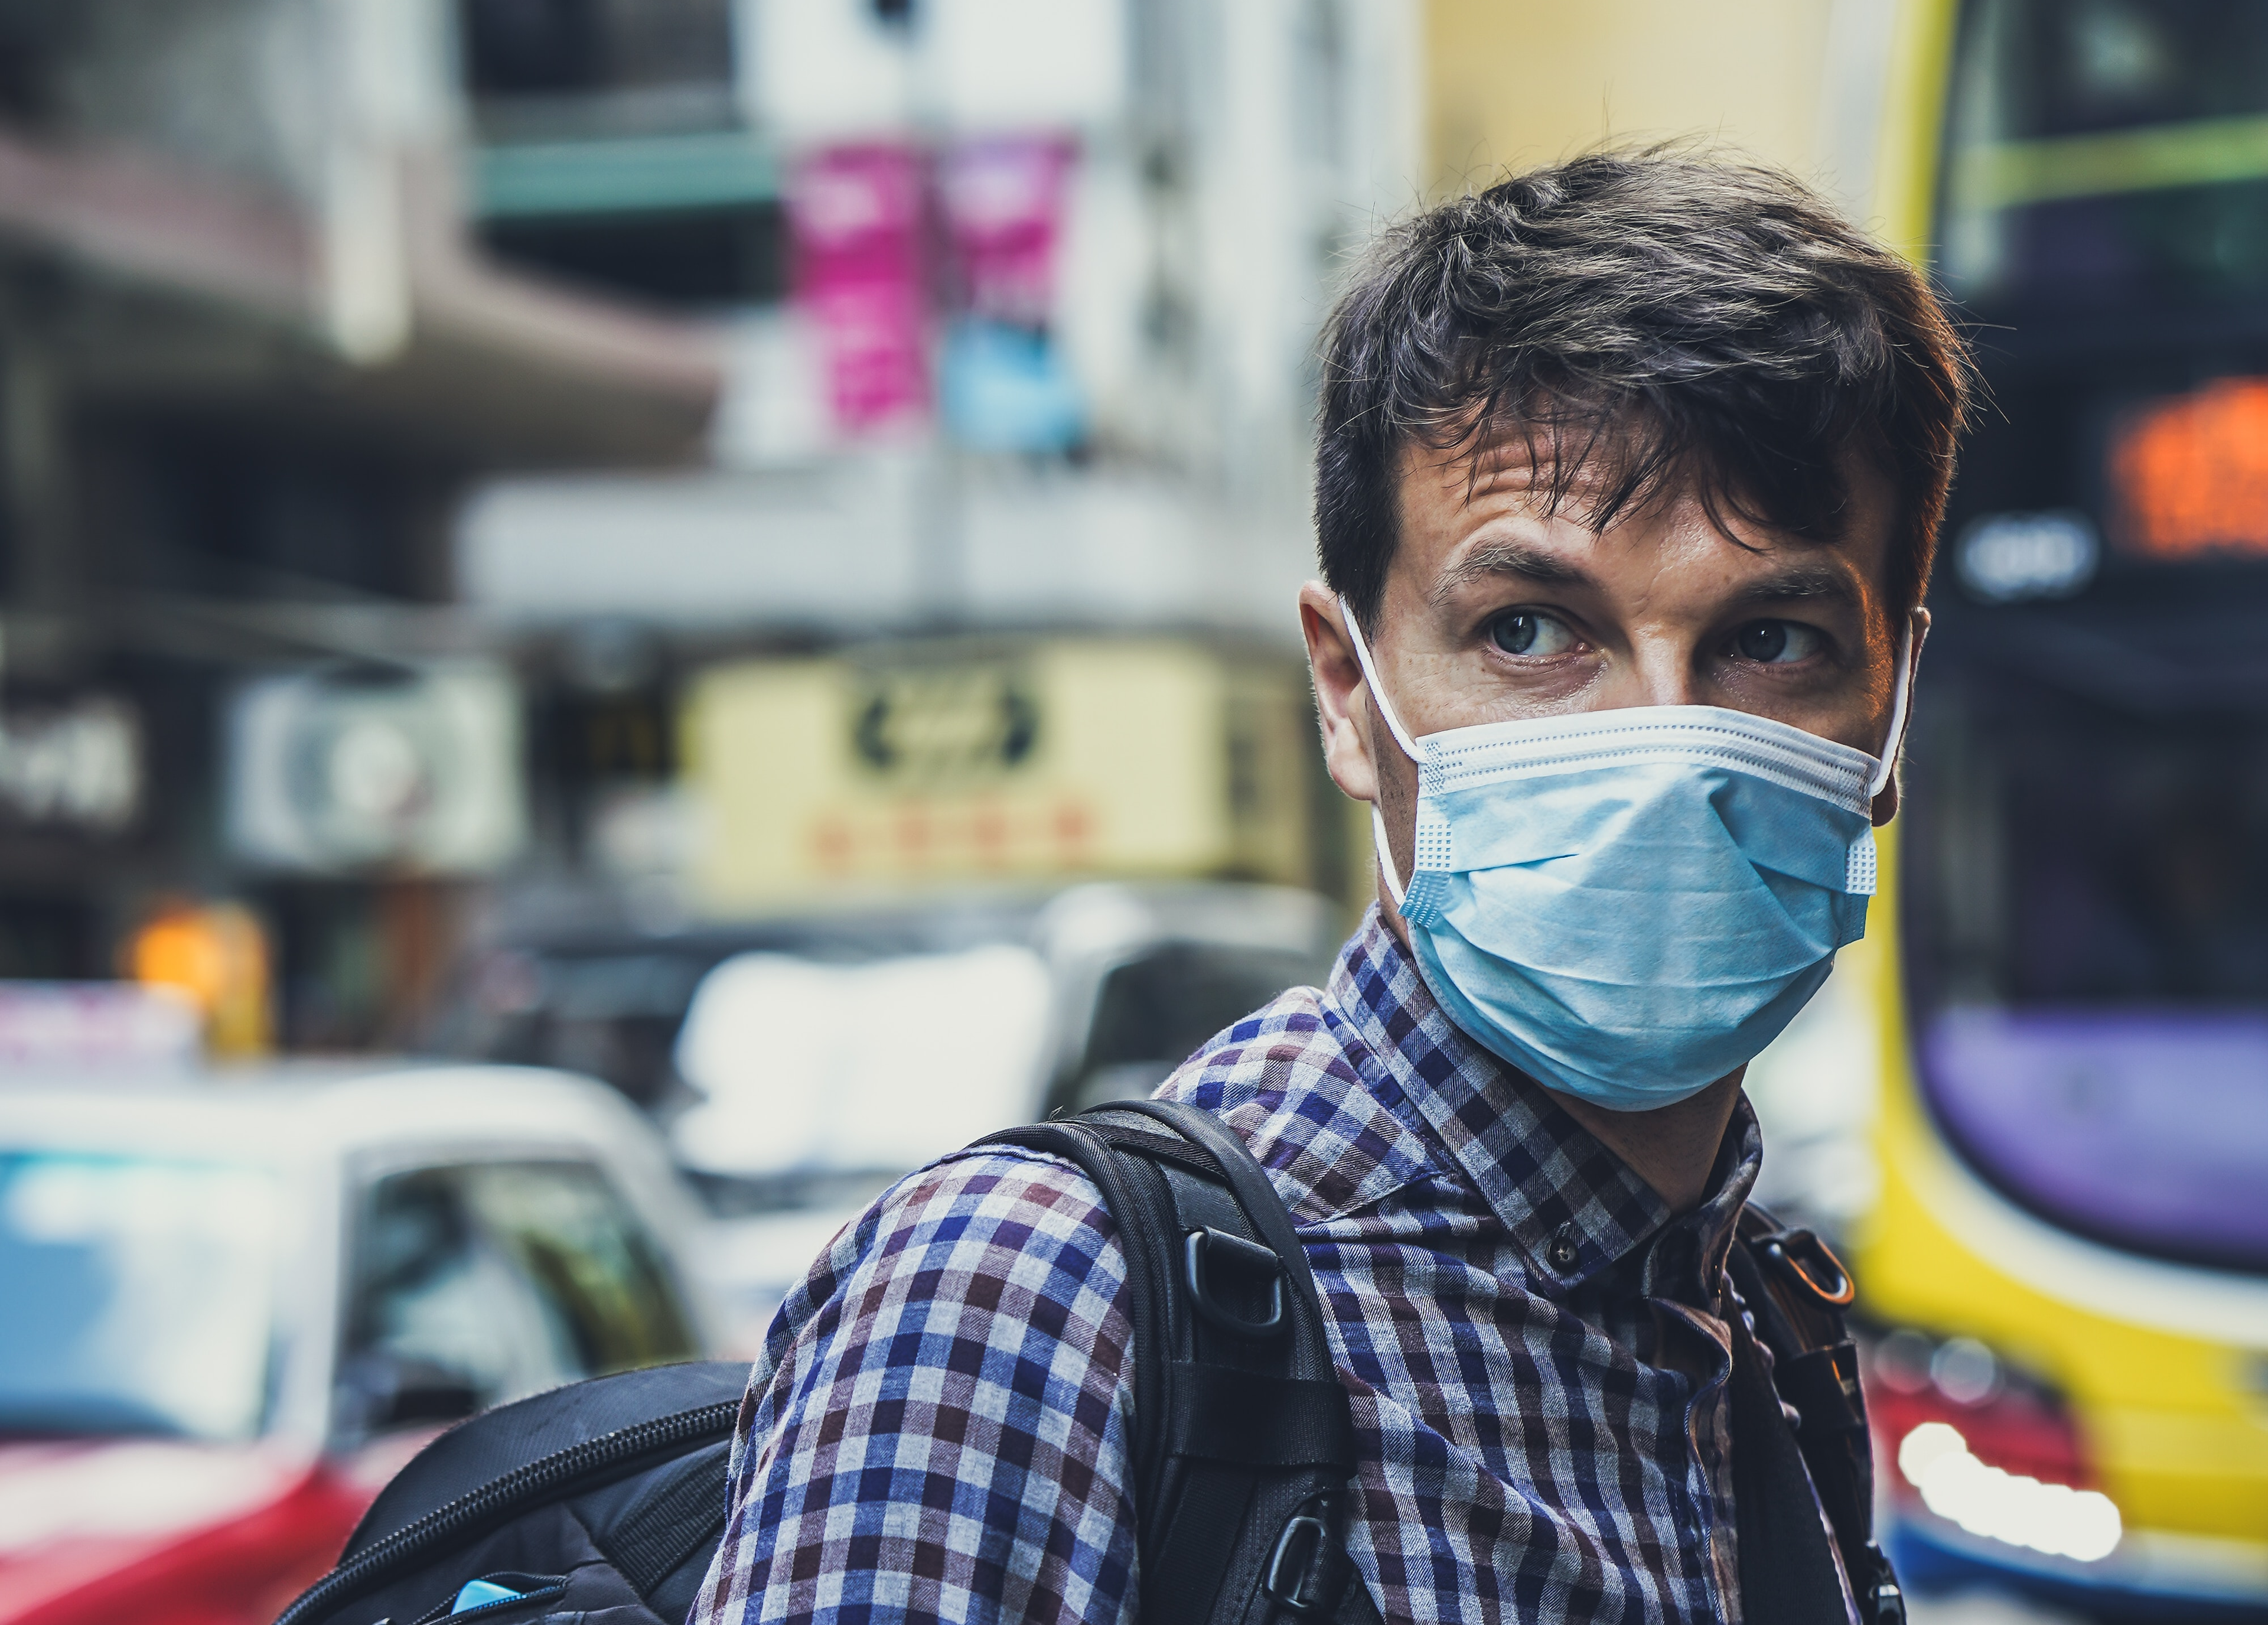 A man wearing a facemask to protect himself from viruses or bacteria, like coronavirus.